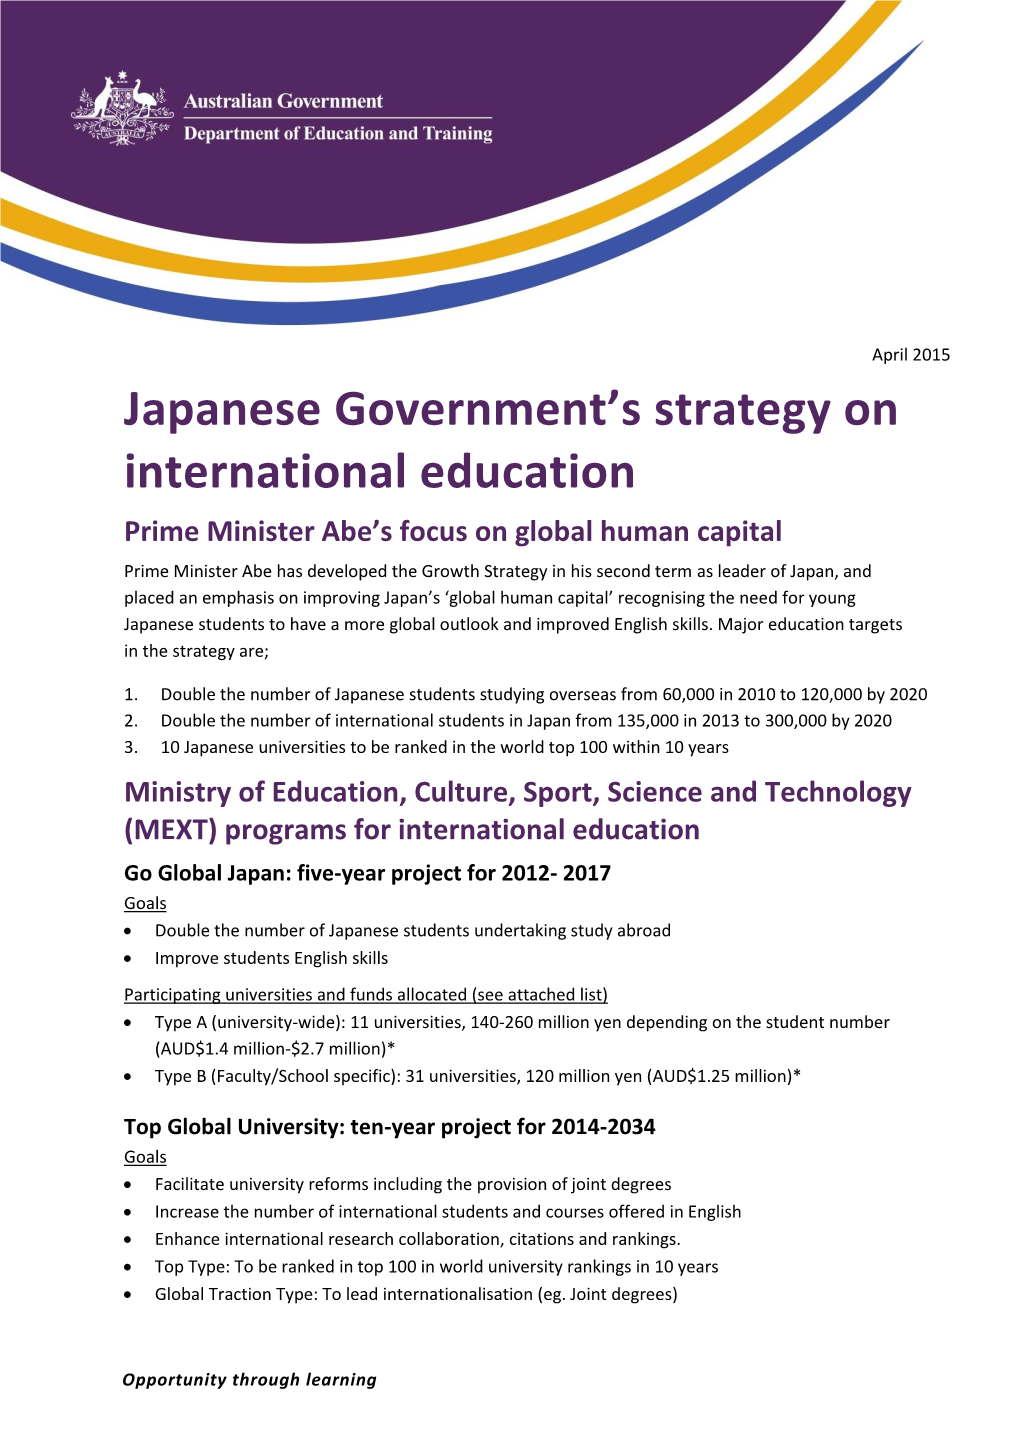 Japanese Government's Strategy on International Education